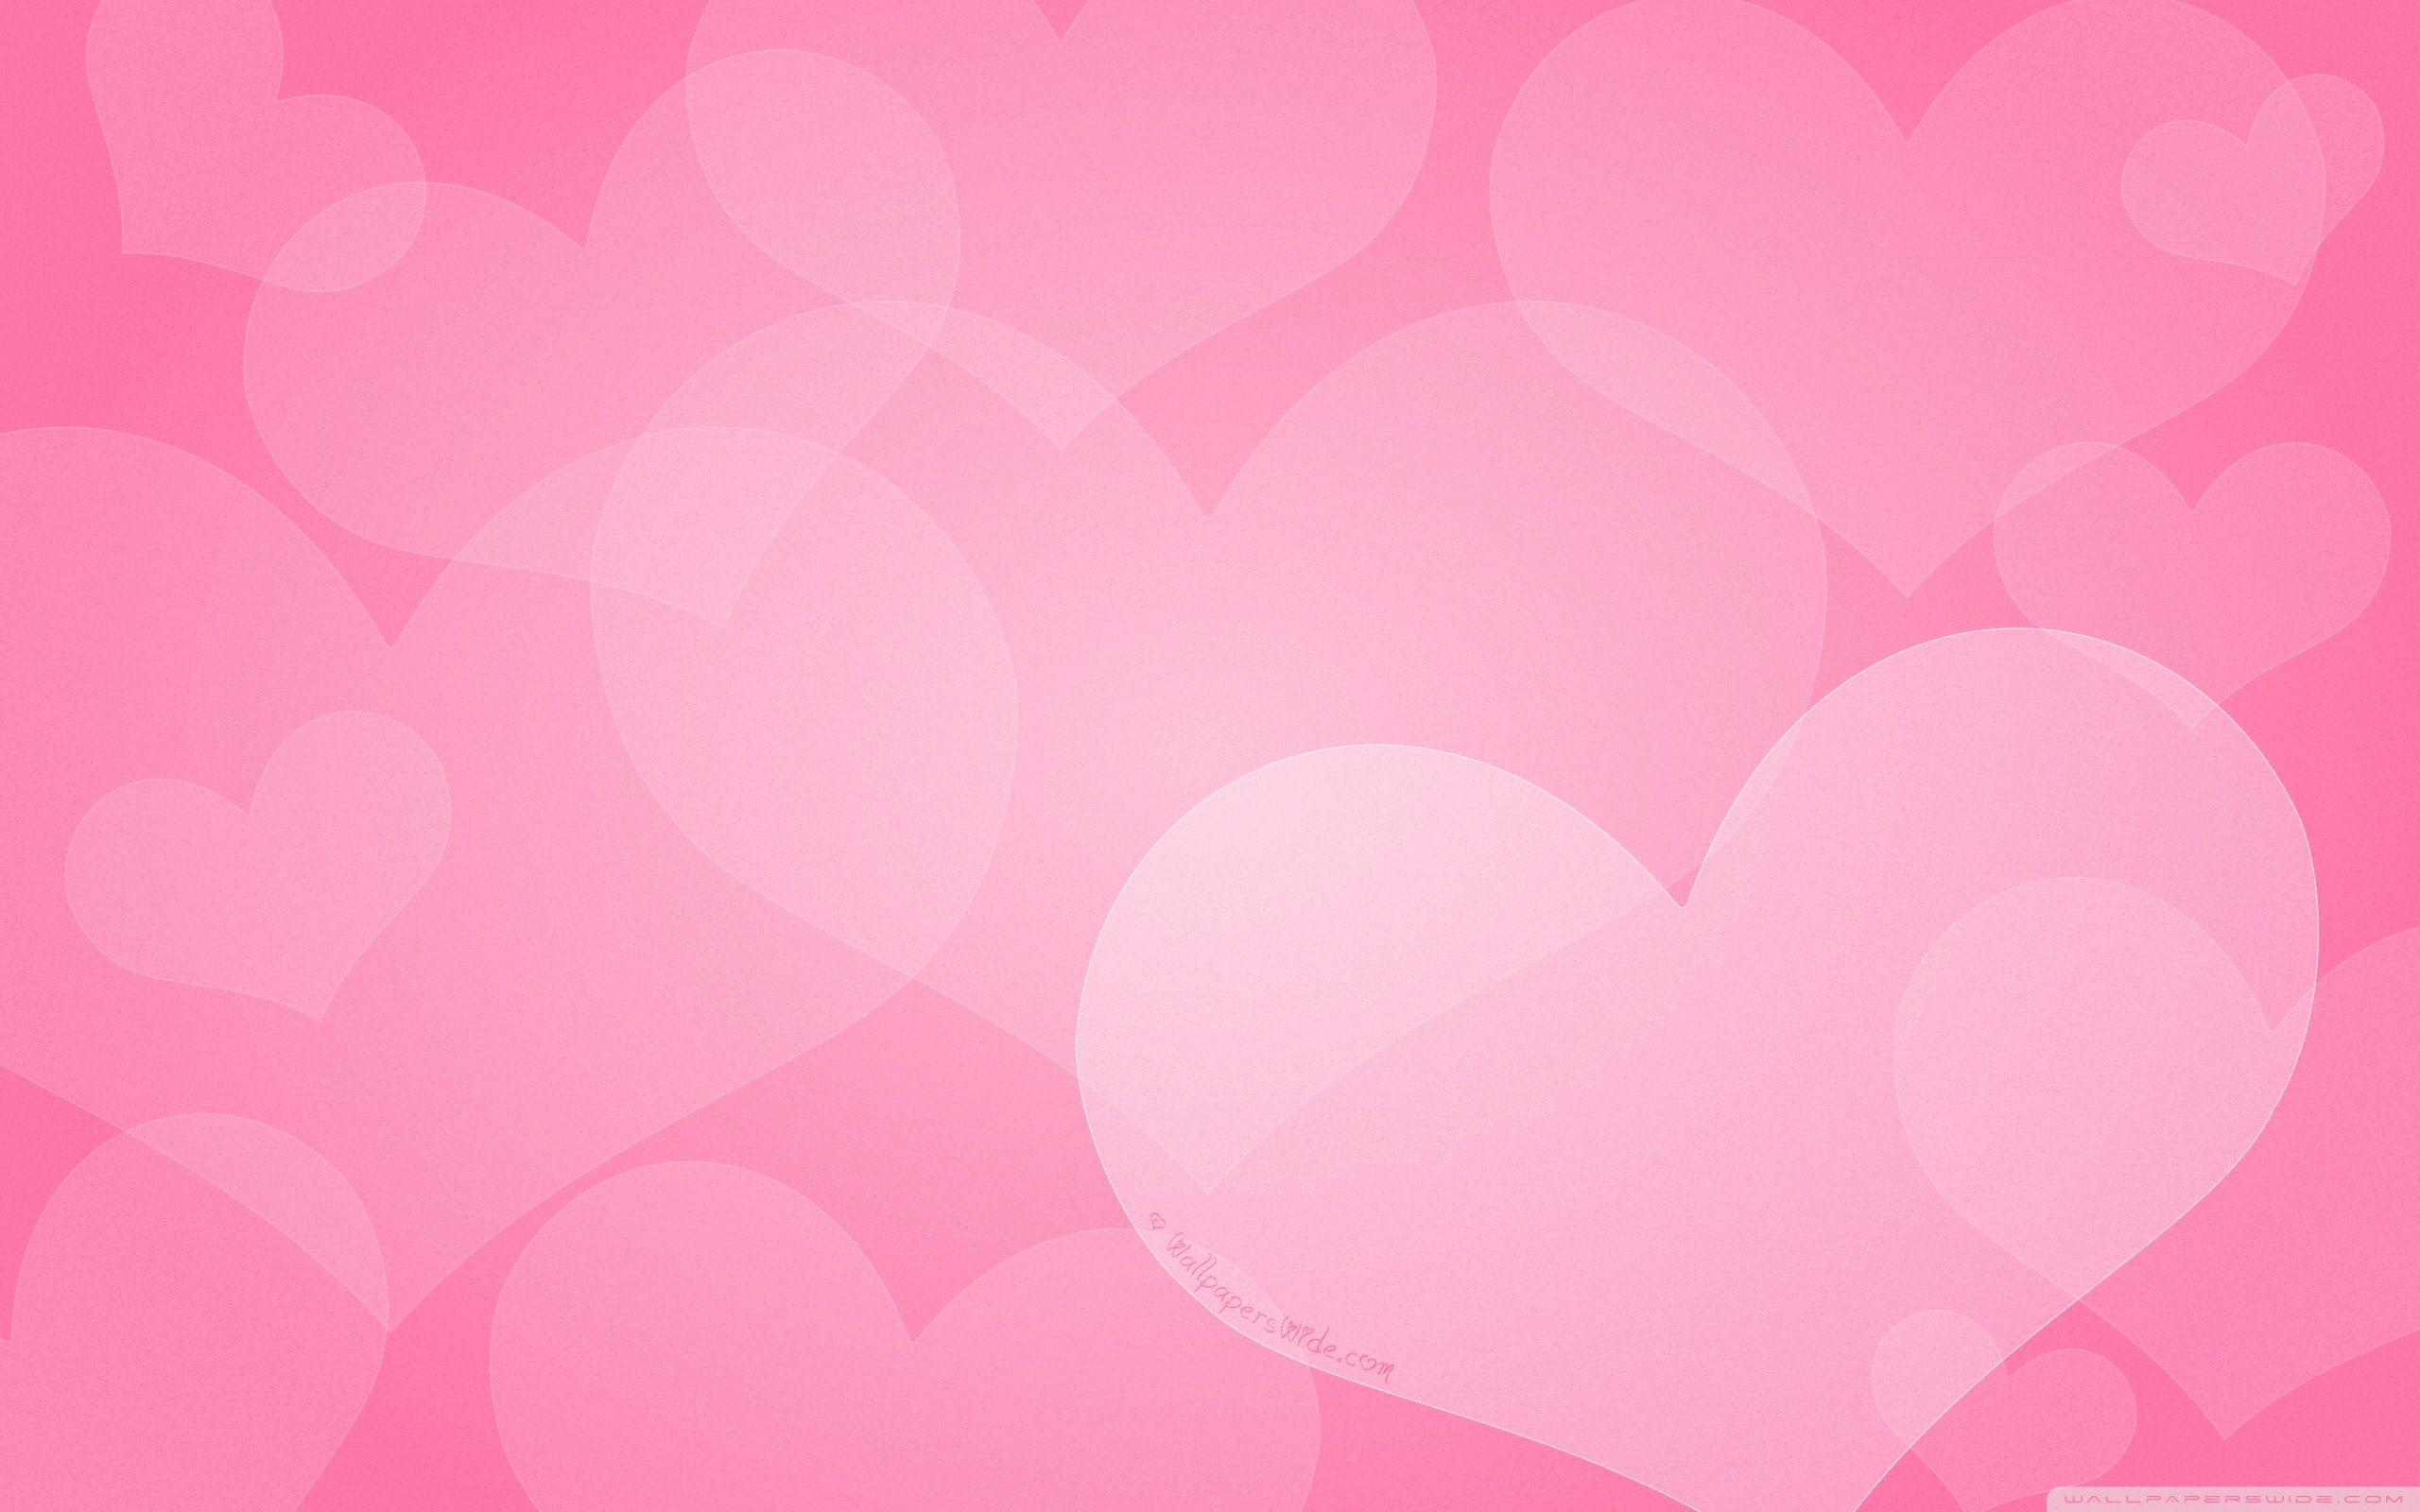 Pink Valentine Day Wallpapers Top Free Pink Valentine Day Backgrounds Wallpaperaccess Ocean wallpaper summer wallpaper iphone background wallpaper galaxy wallpaper phone backgrounds. pink valentine day wallpapers top